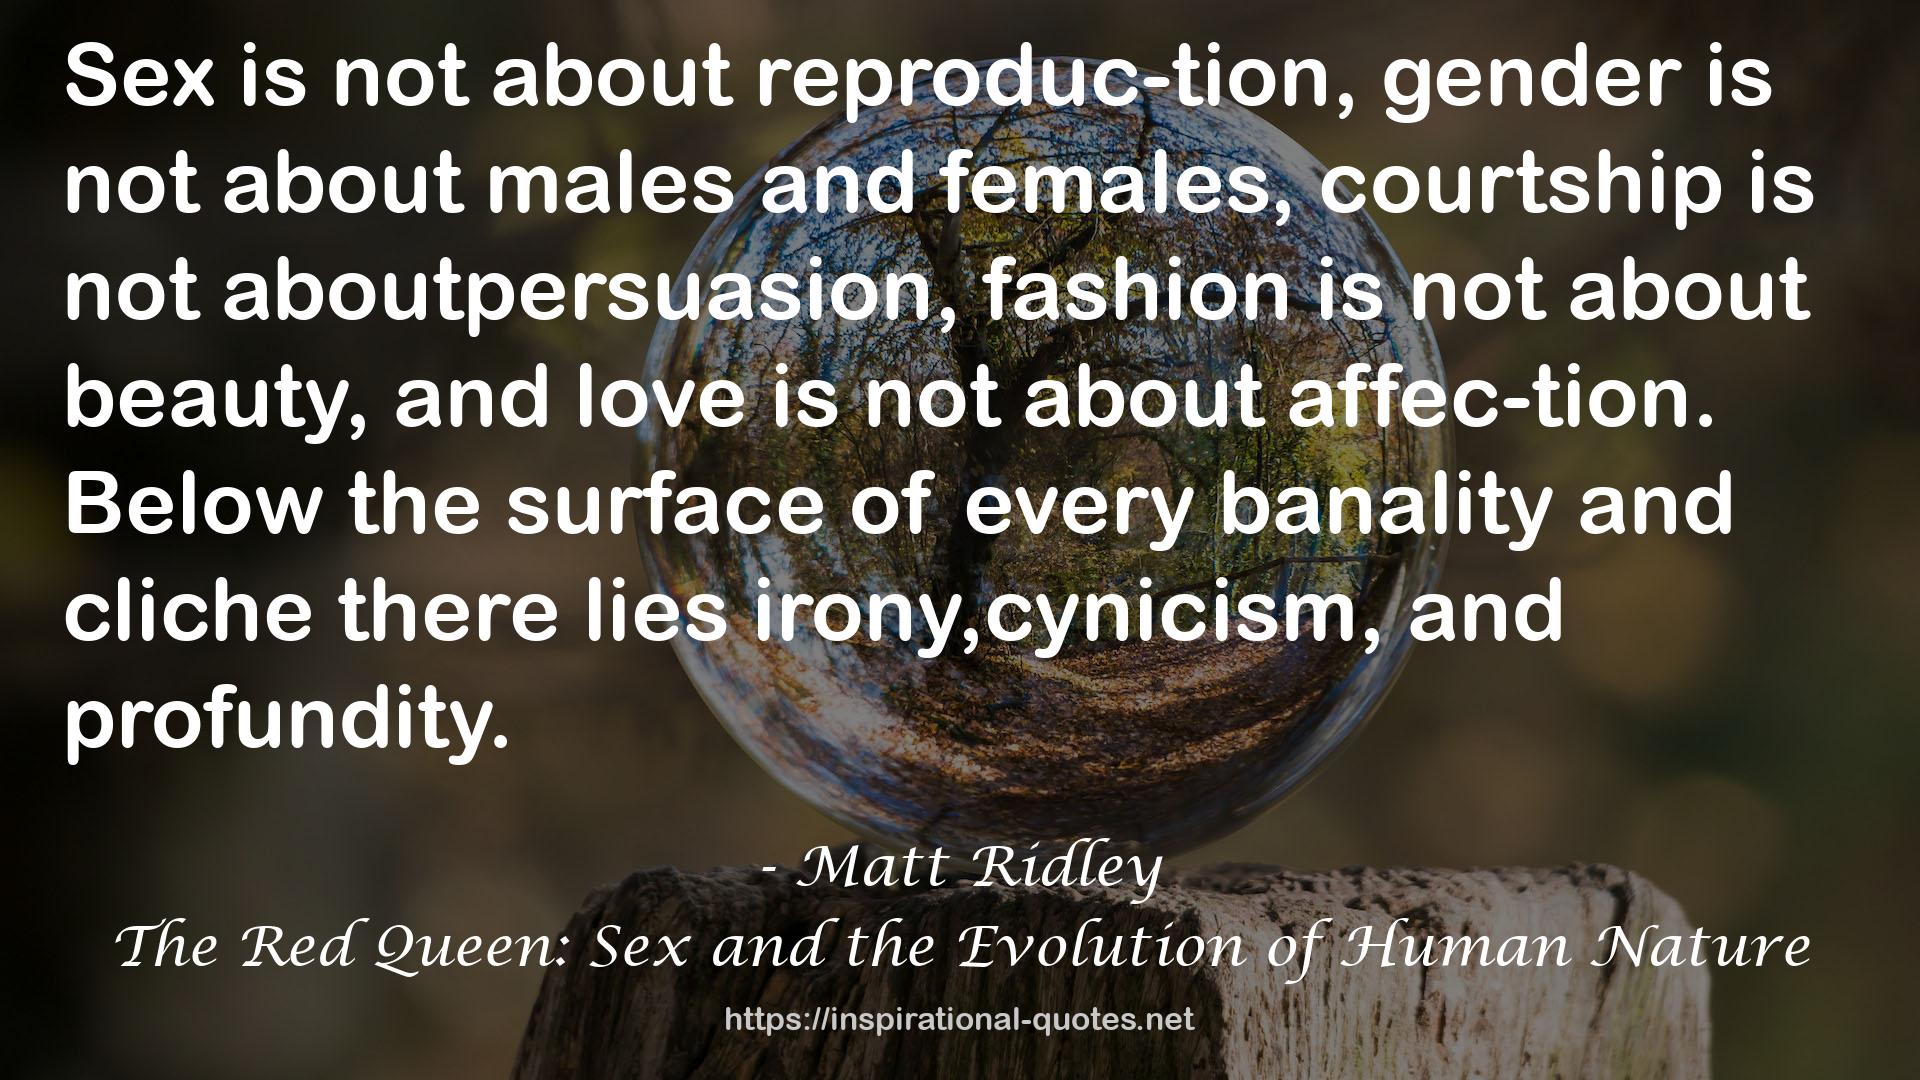 The Red Queen: Sex and the Evolution of Human Nature QUOTES